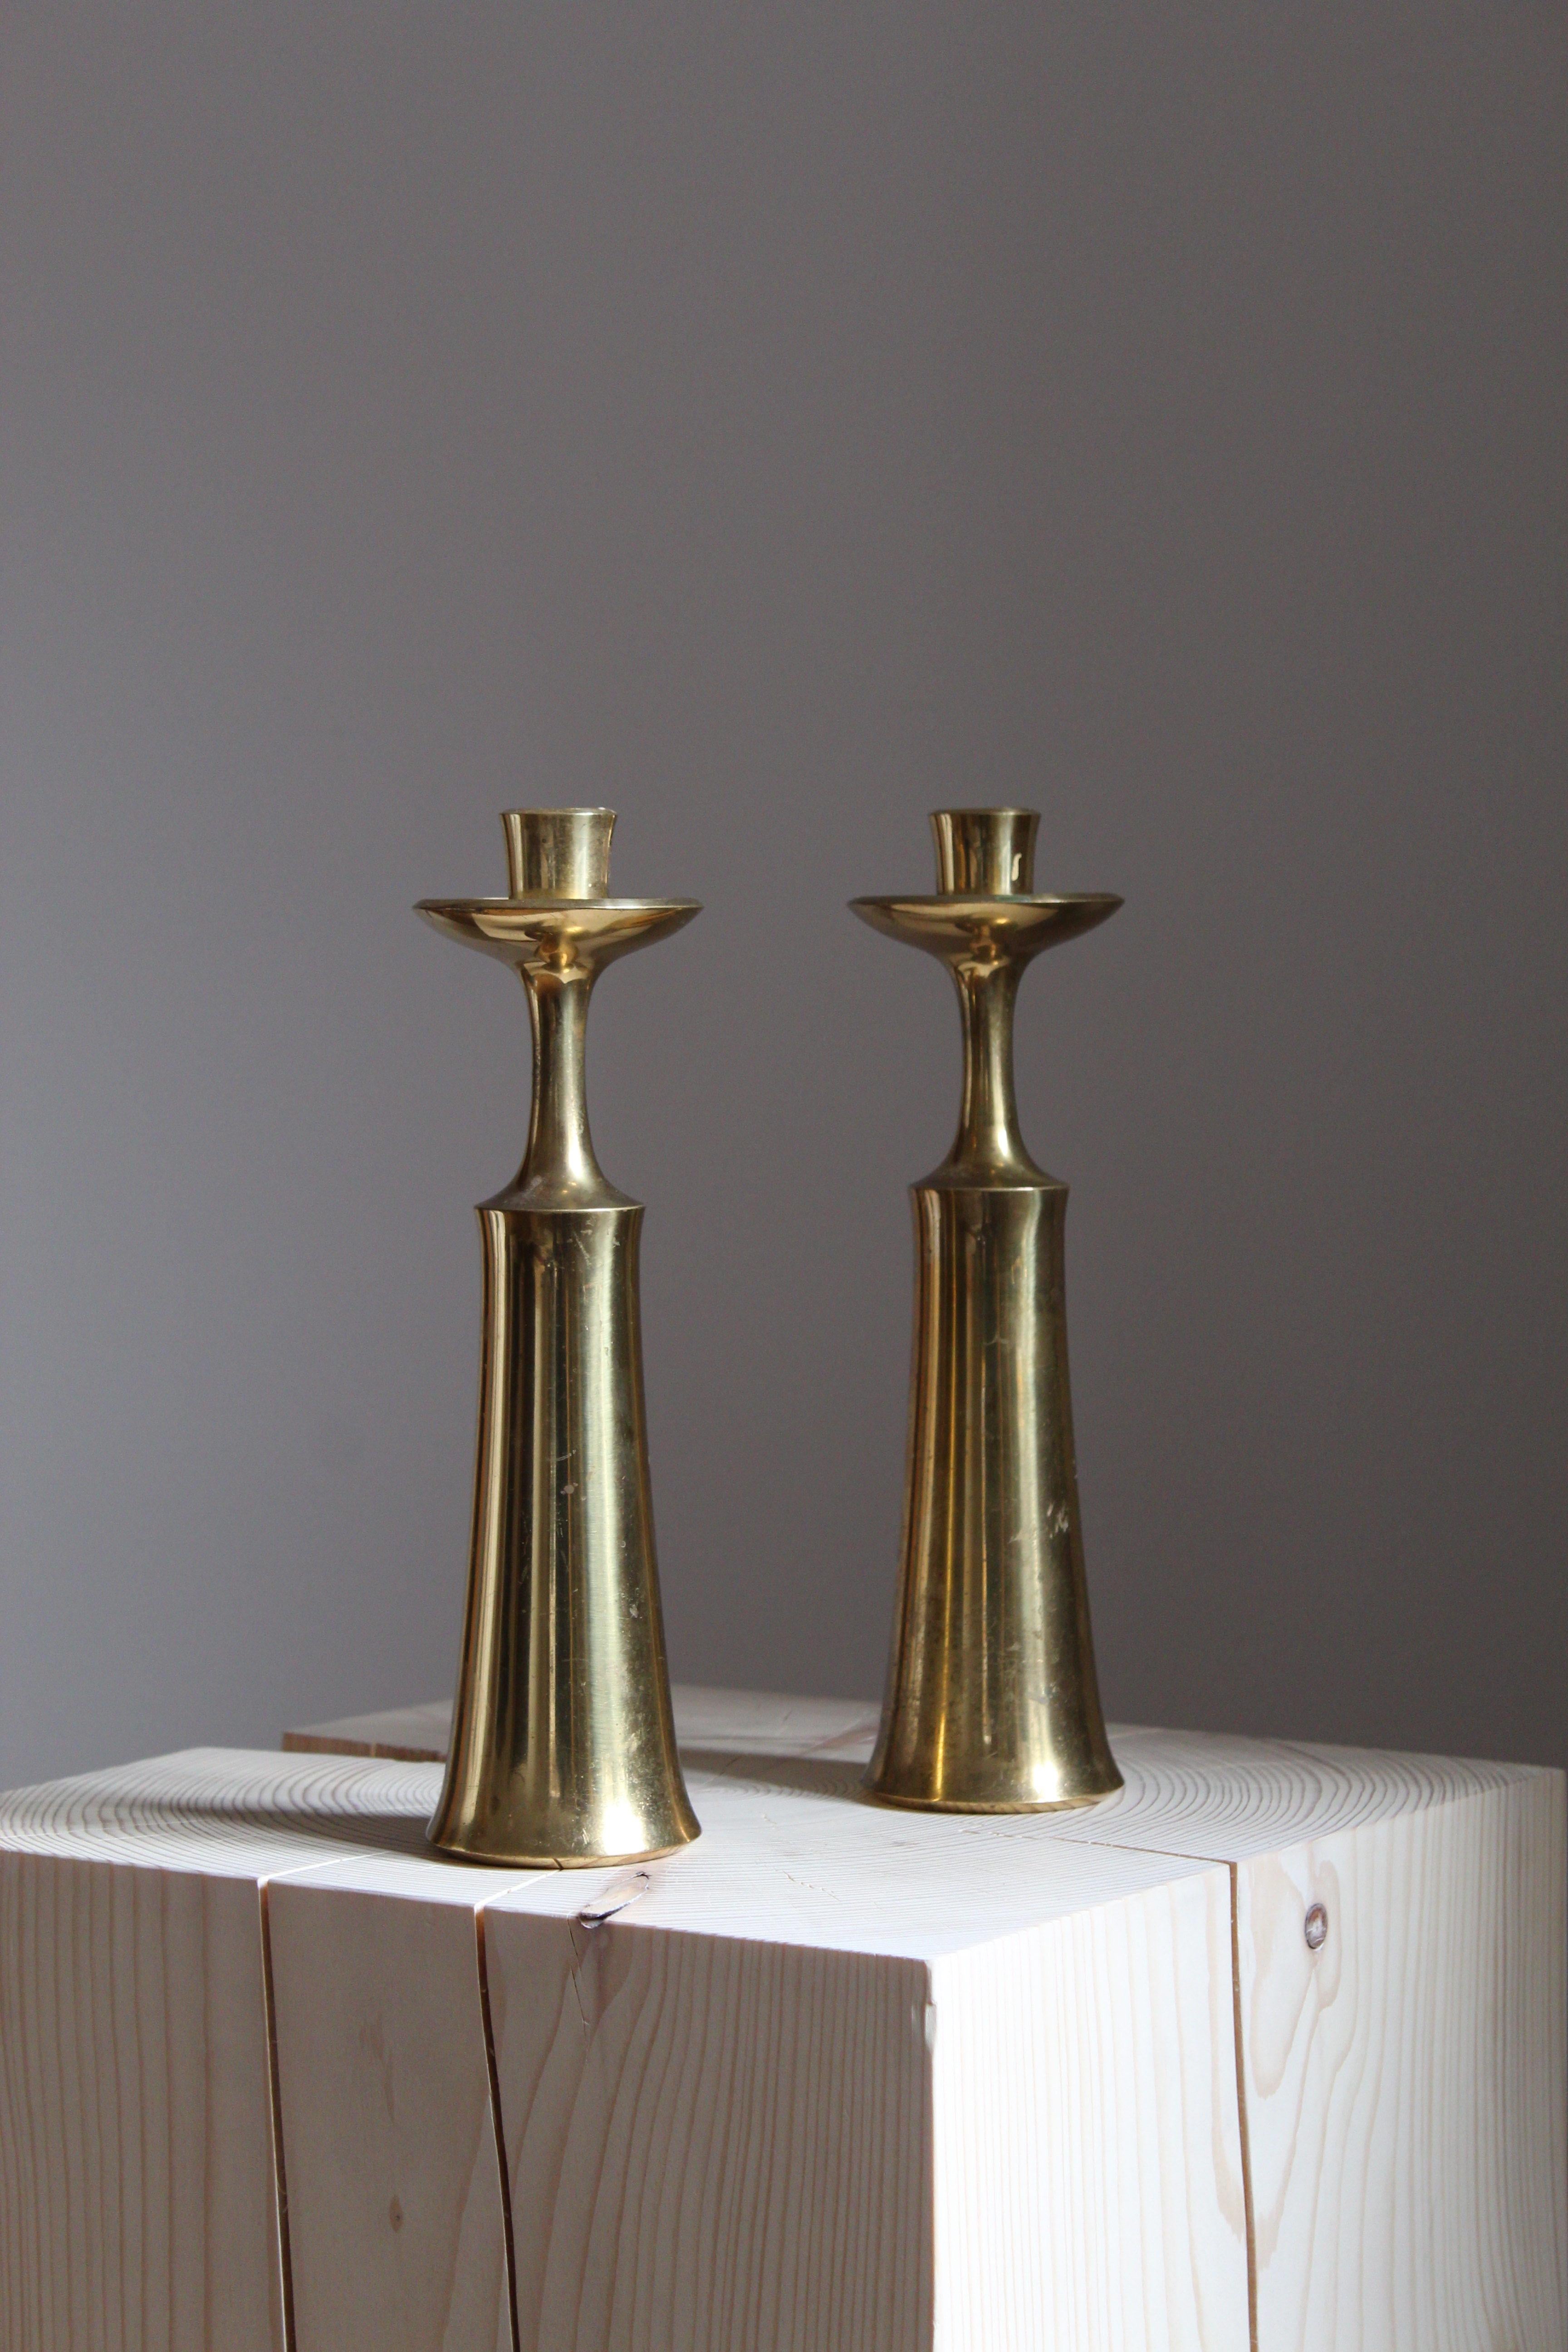 A sculptural candlestick designed and produced by Danish sculptor Jens Quistgaard. Marked.